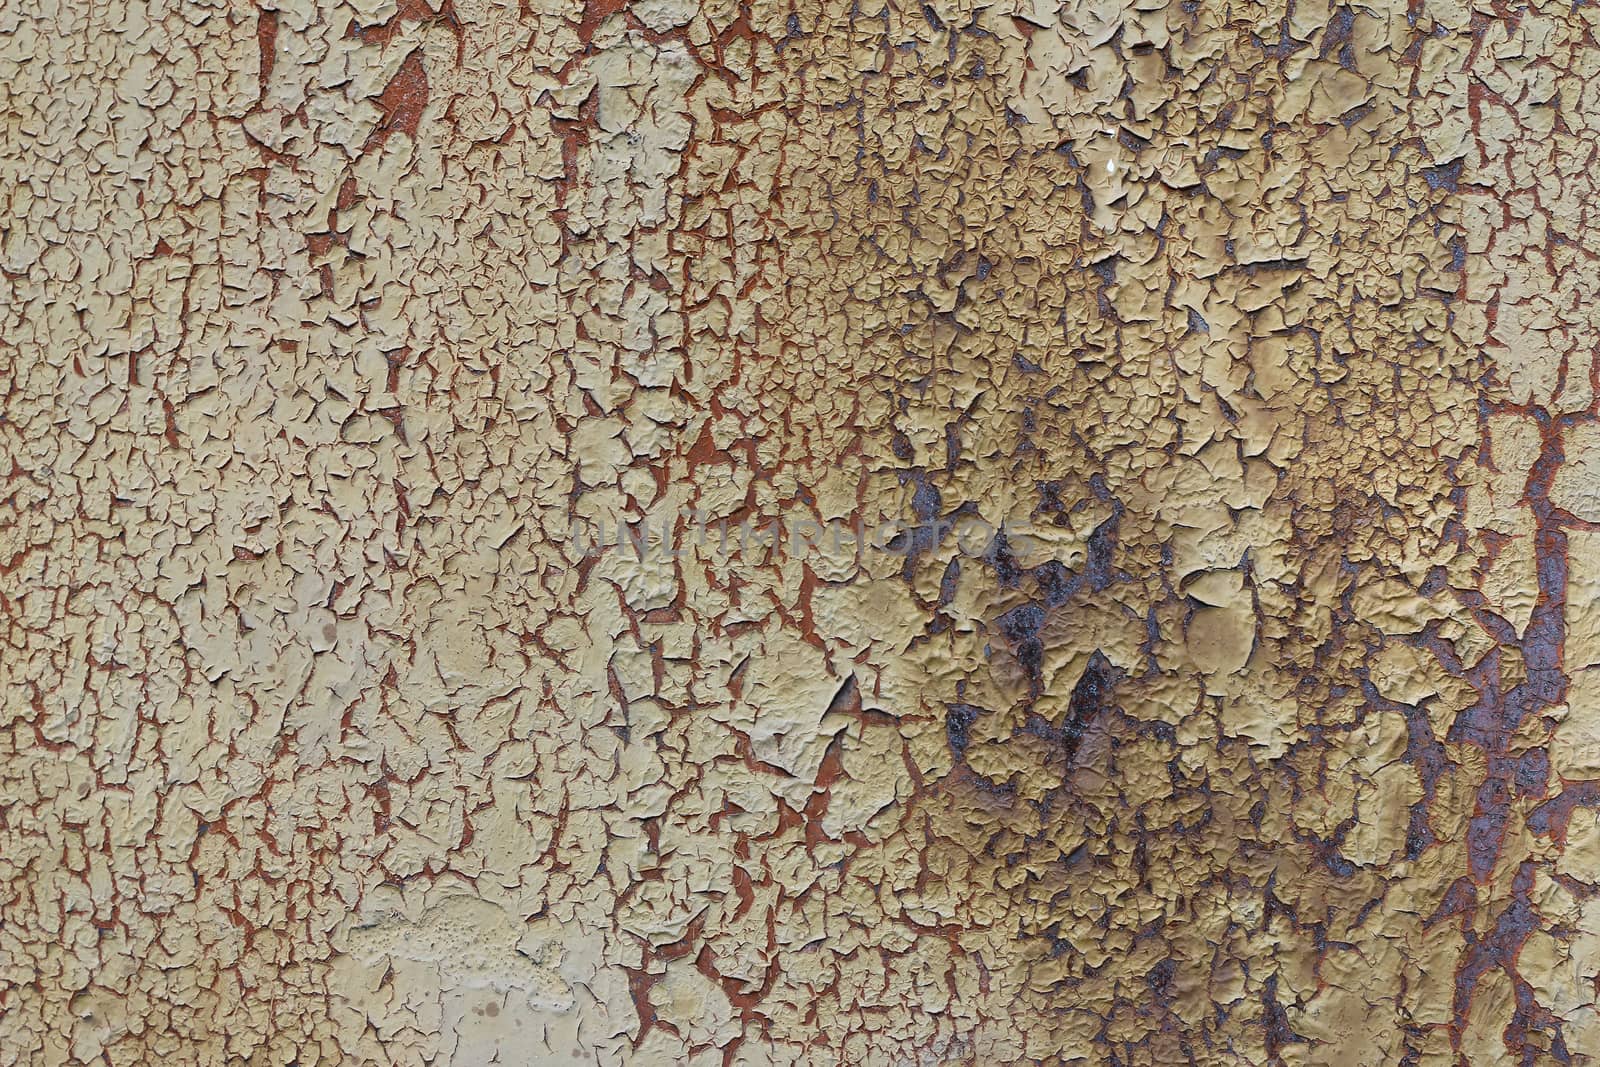 Detail of the racked paint on the rusty iron